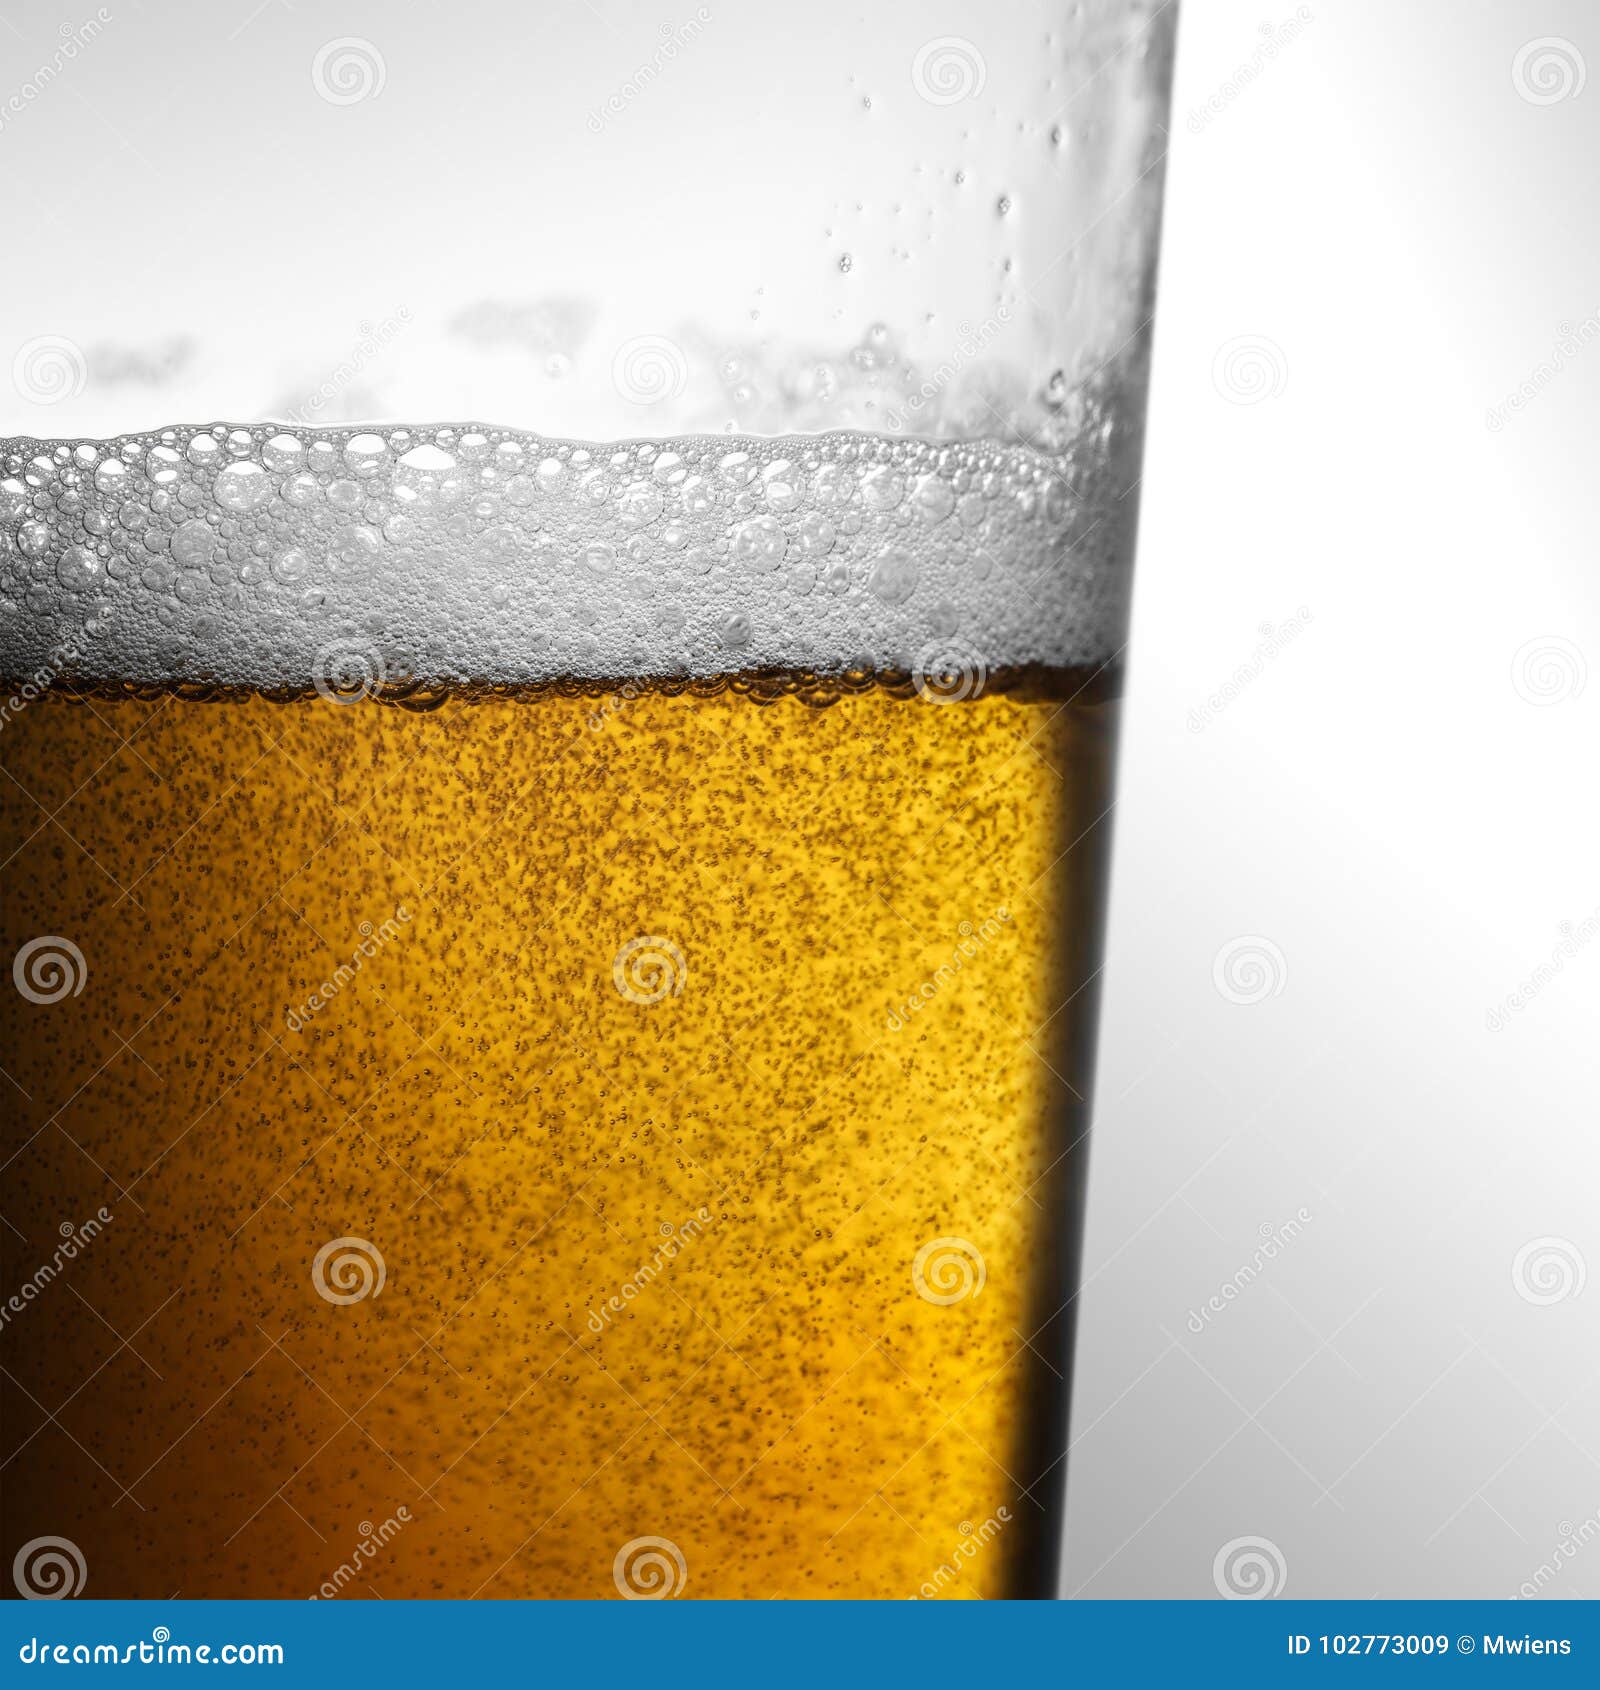 closeup of freshly poured glass of beer with frothy head and bubbles